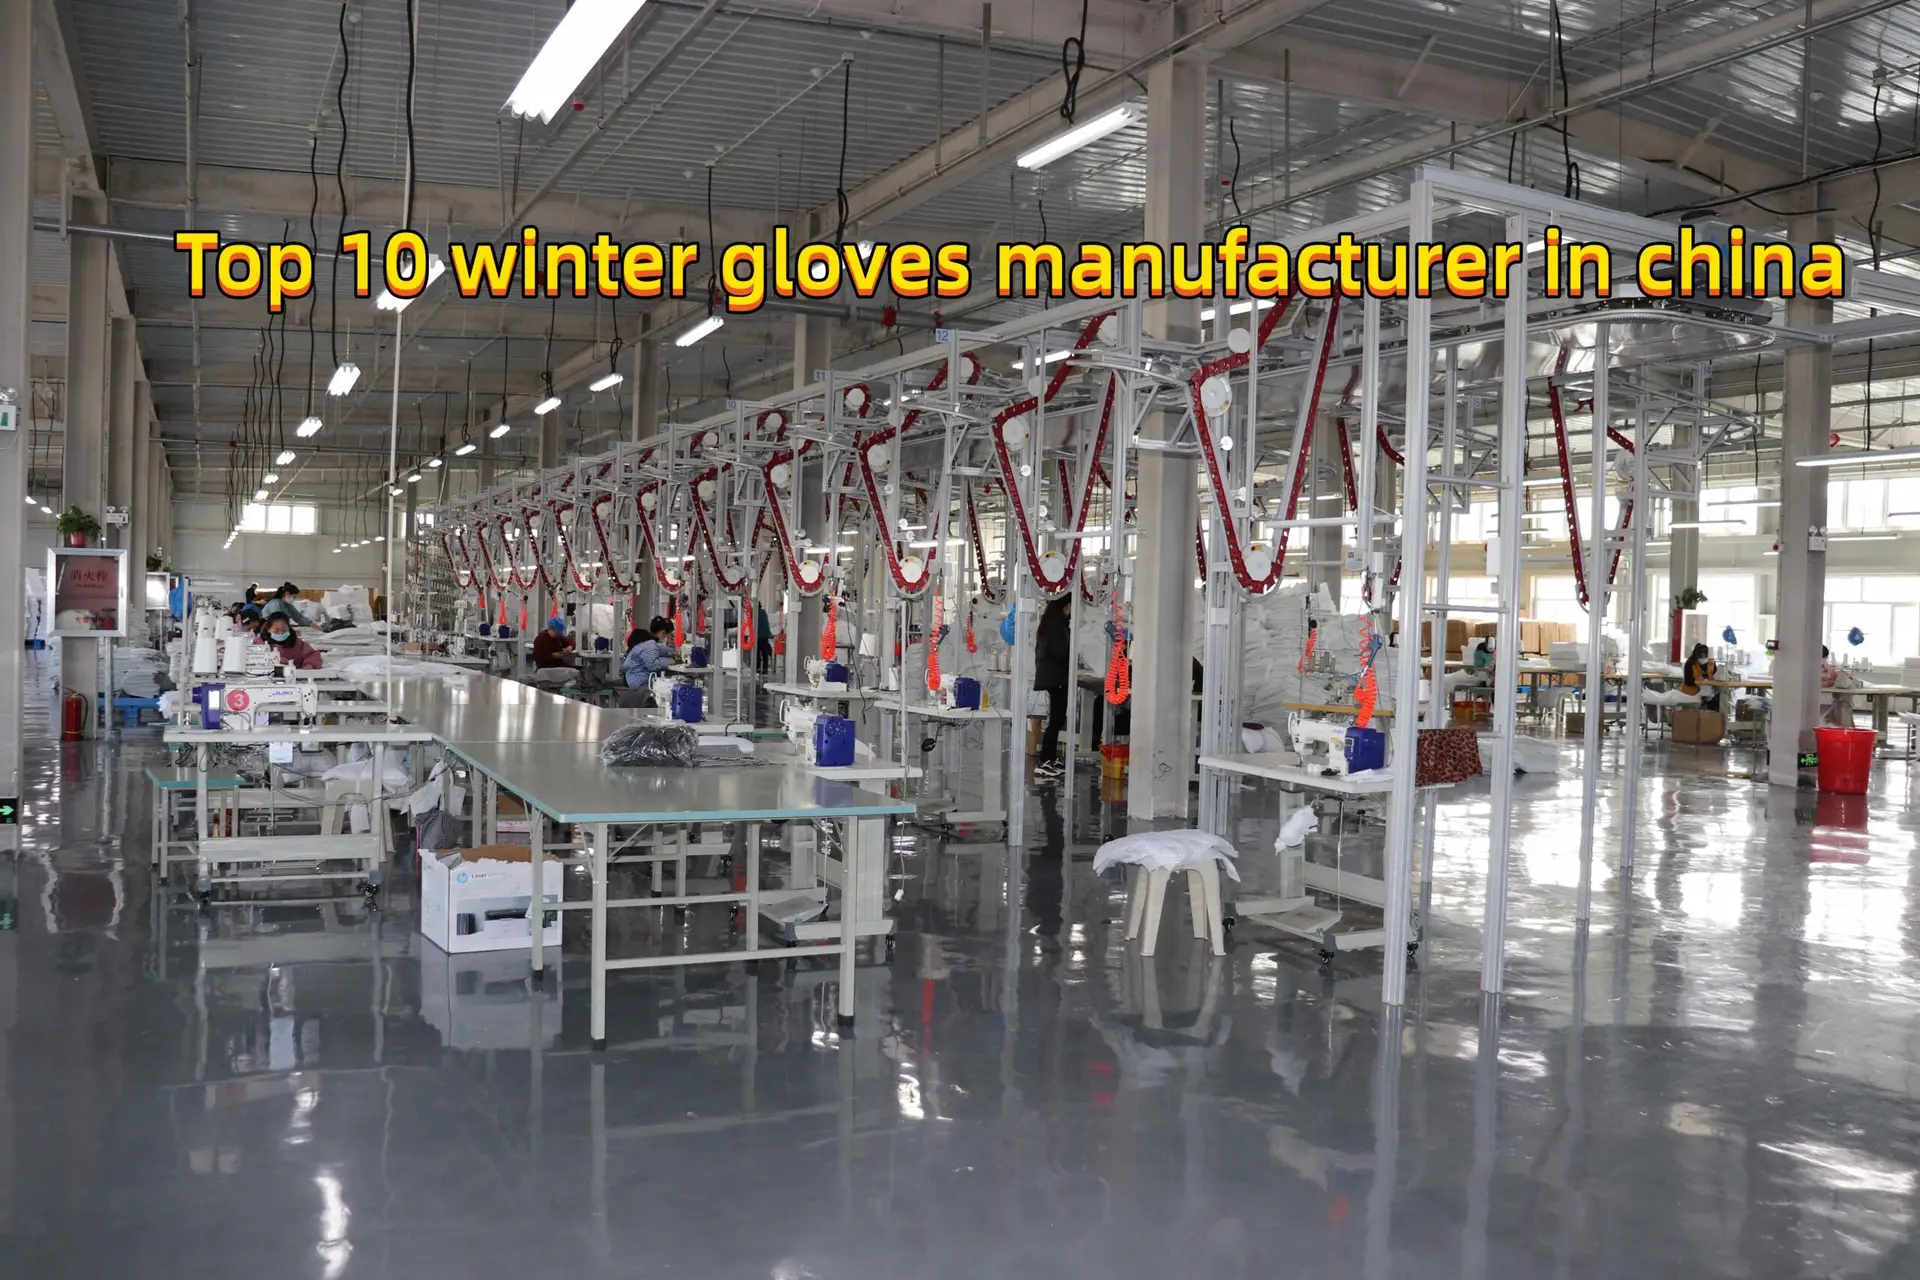 Top 10 winter gloves manufacturer in china